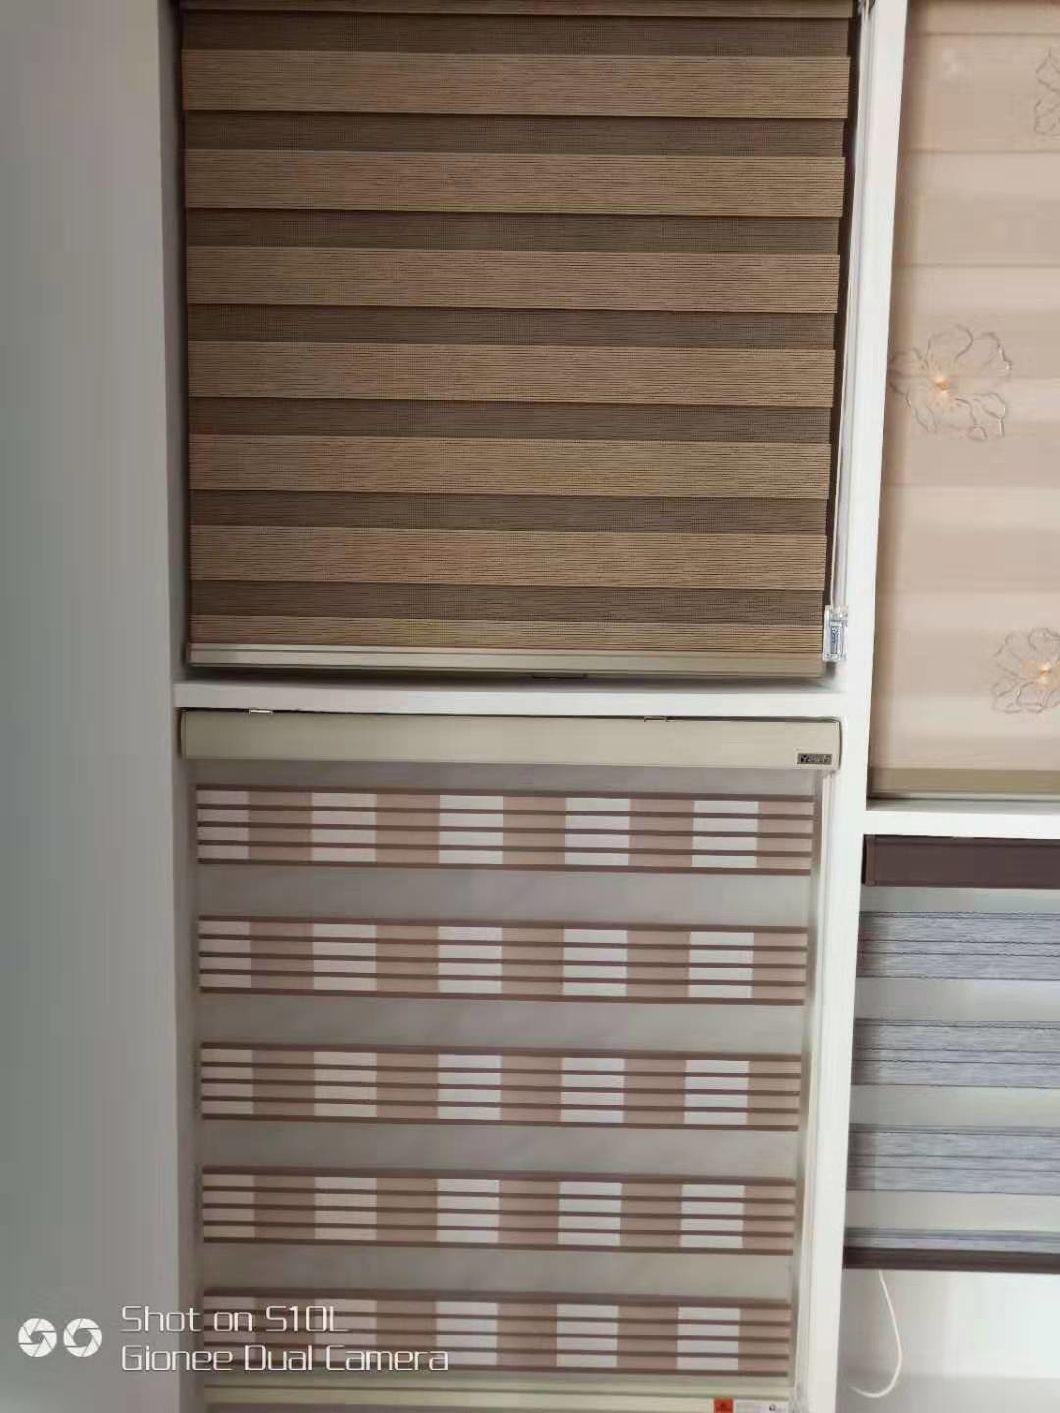 Manual Blinds Plastic Chains or Stainless Metal Chains Zebra Roller Blinds